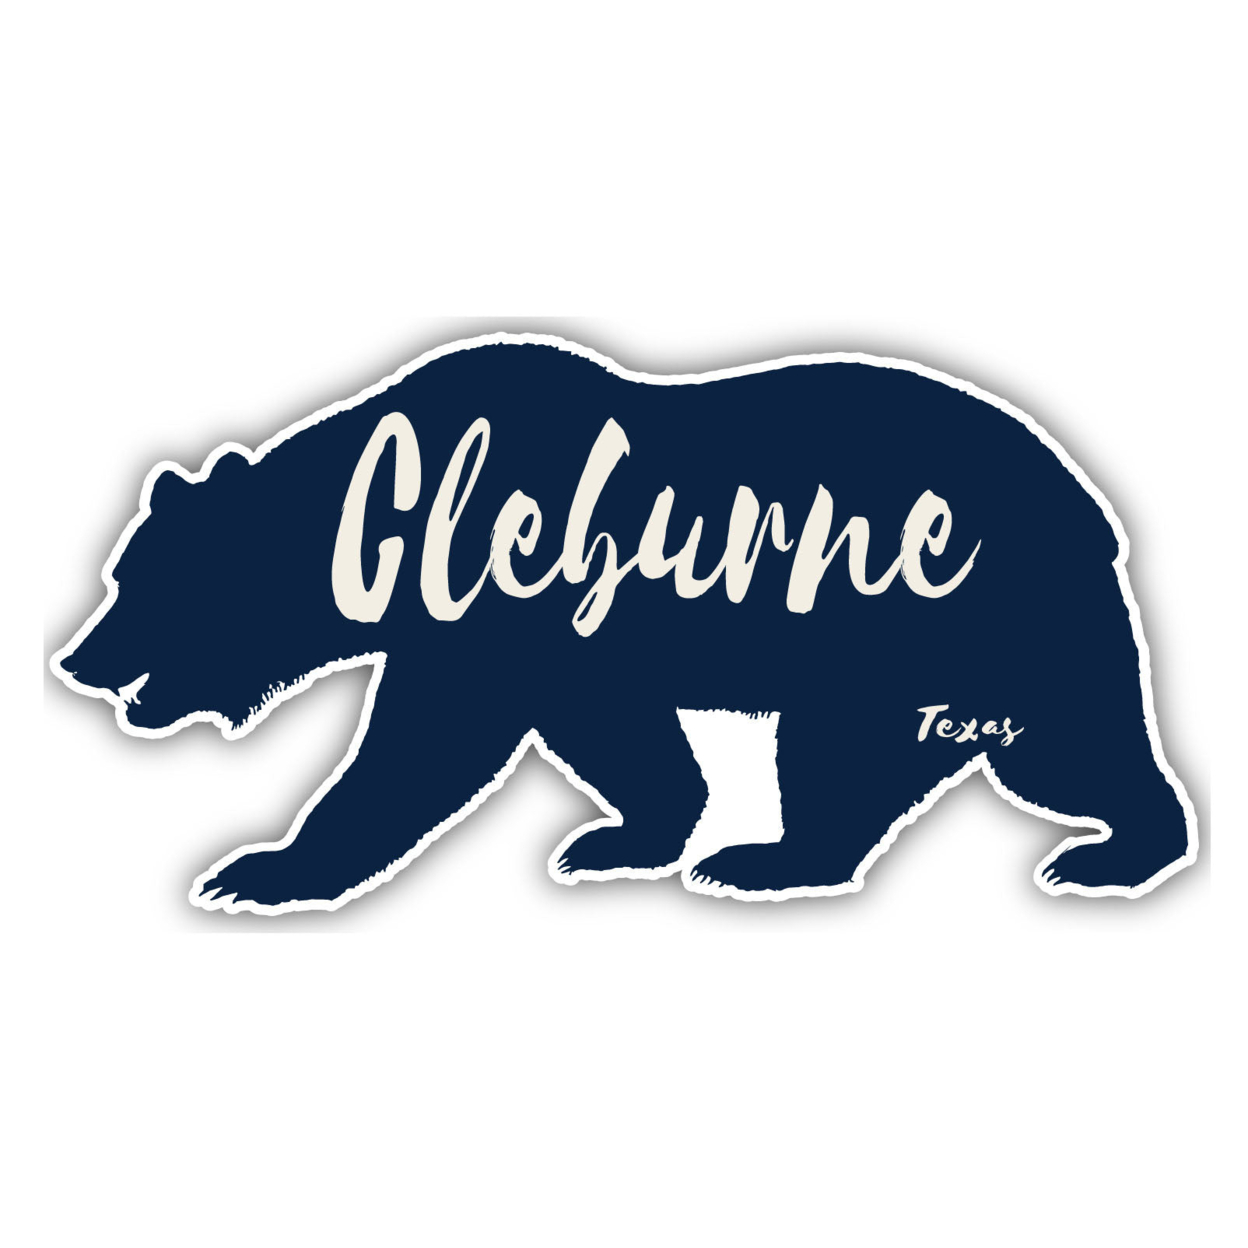 Cleburne Texas Souvenir Decorative Stickers (Choose Theme And Size) - 4-Pack, 6-Inch, Bear